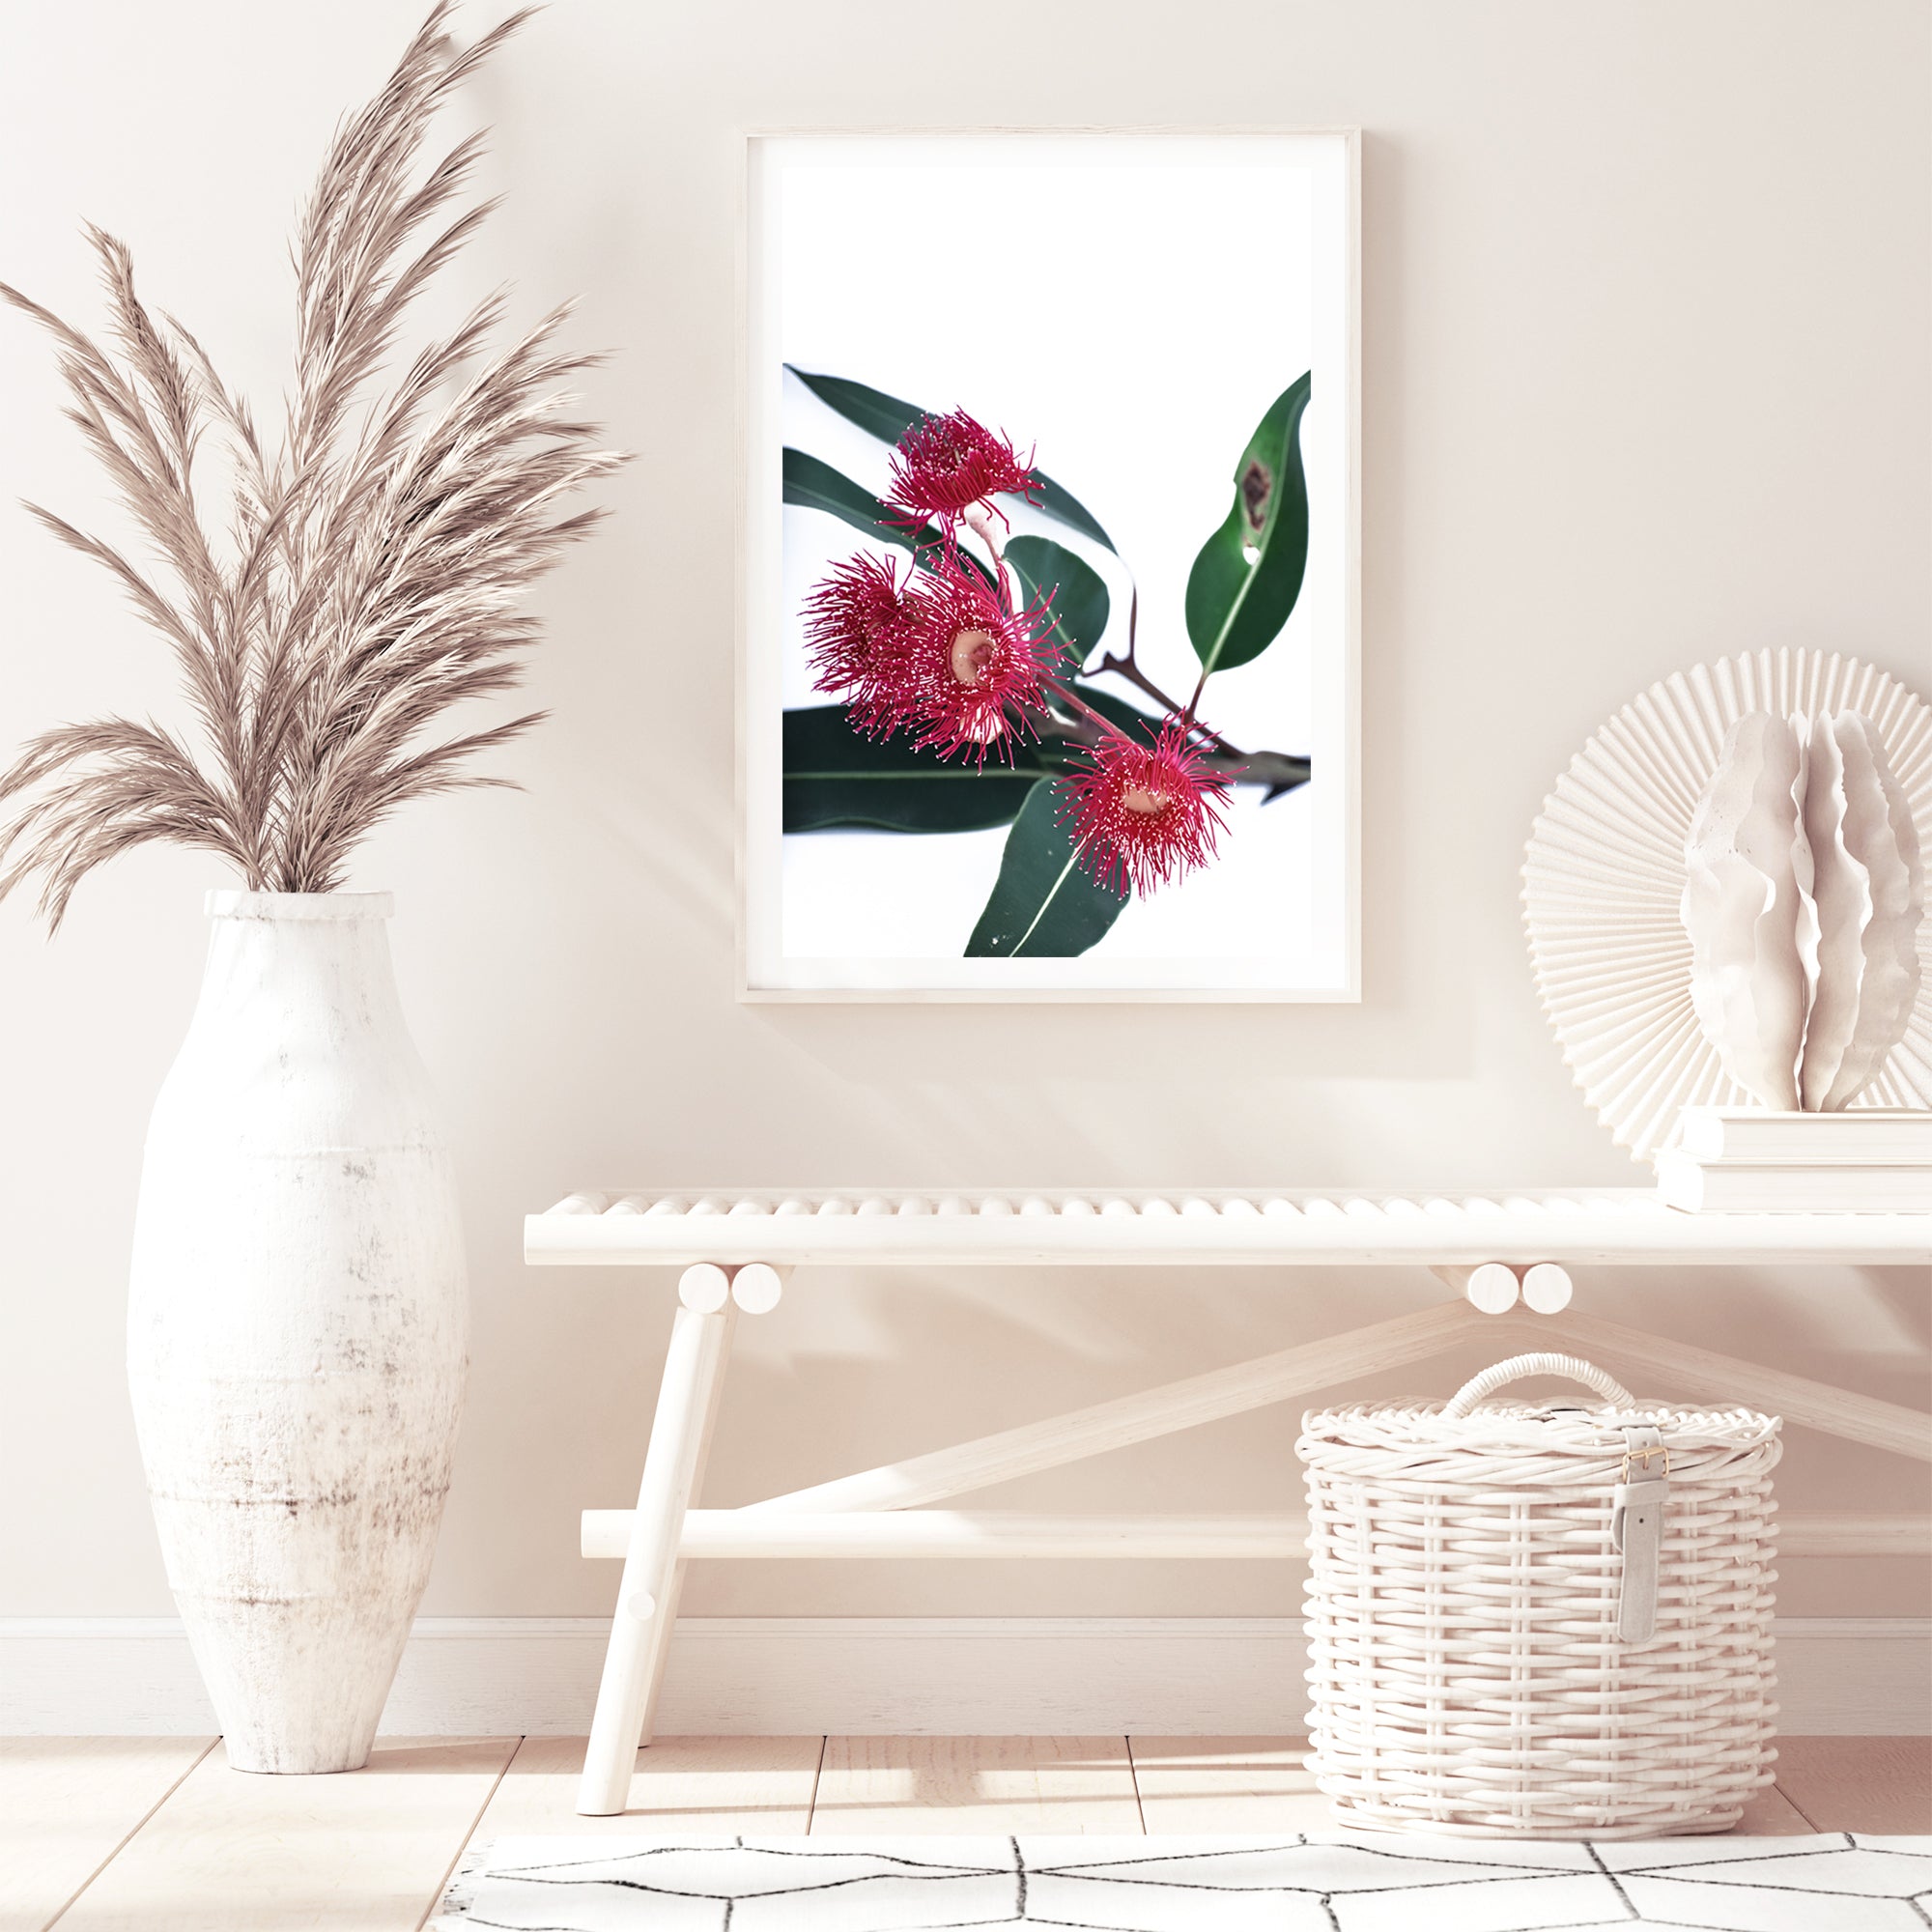 A photo floral wall art featuring beautiful red wild flowers A and green eucalyptus leaves, available framed or unframed.